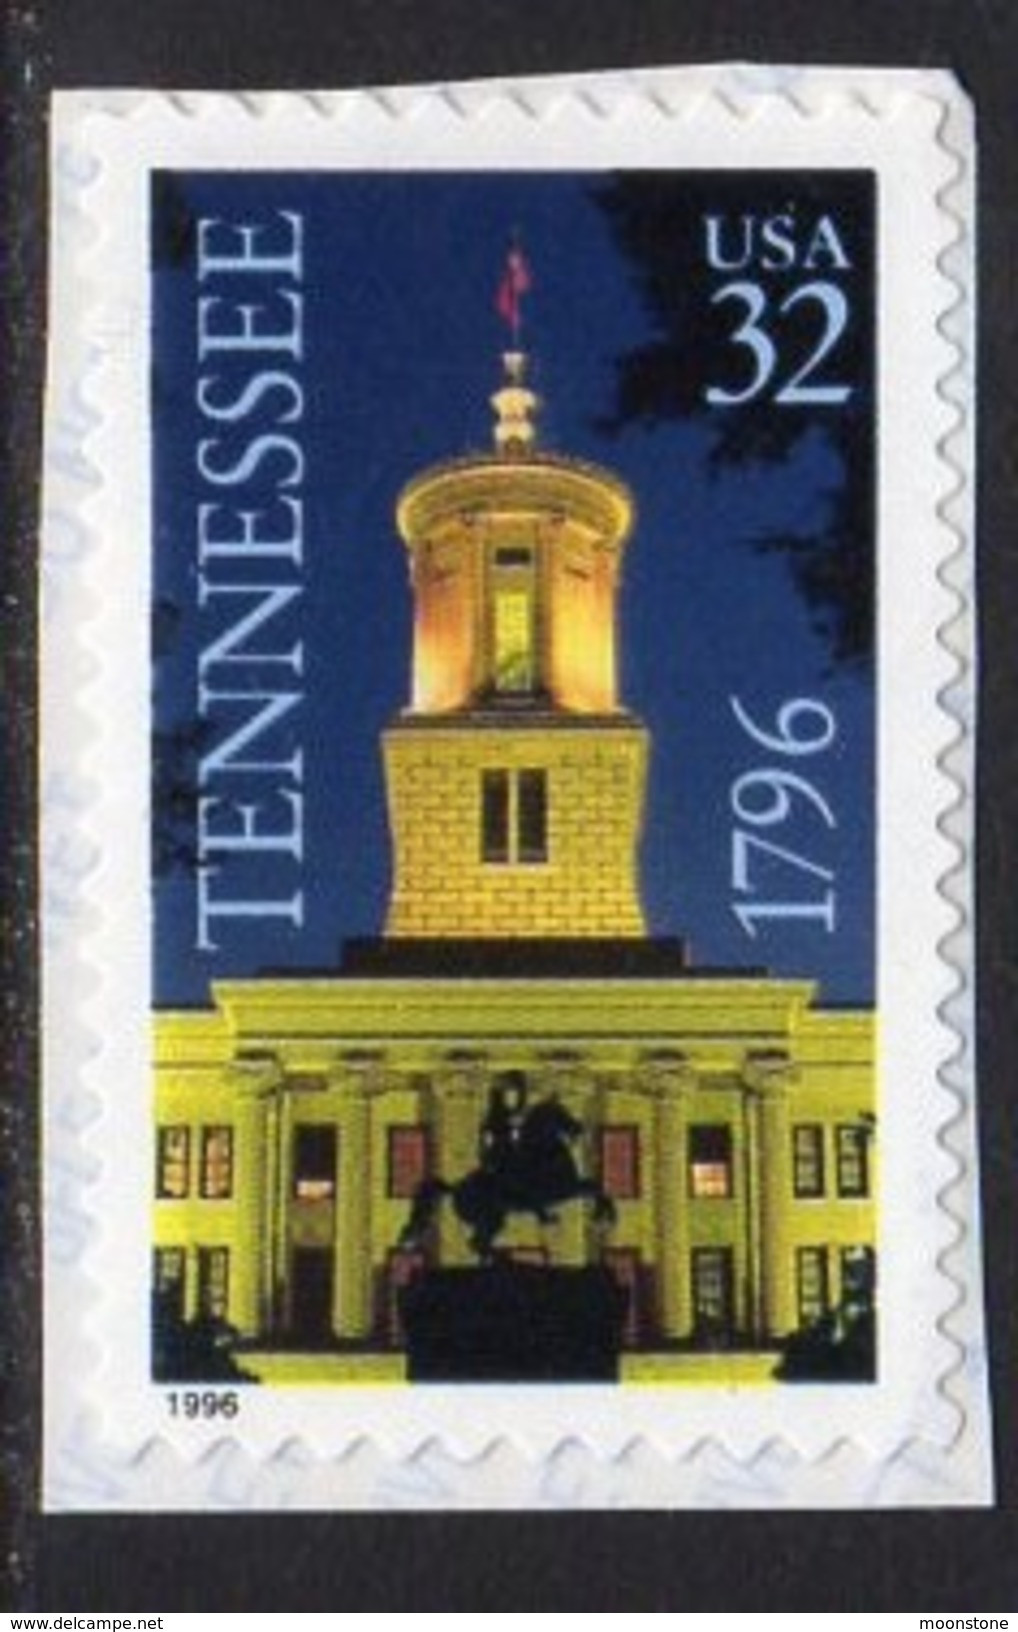 USA 1996 Bicentenary Of Tennessee Statehood, Self-adhesive Gum, MNH (SG 3206) - Unused Stamps